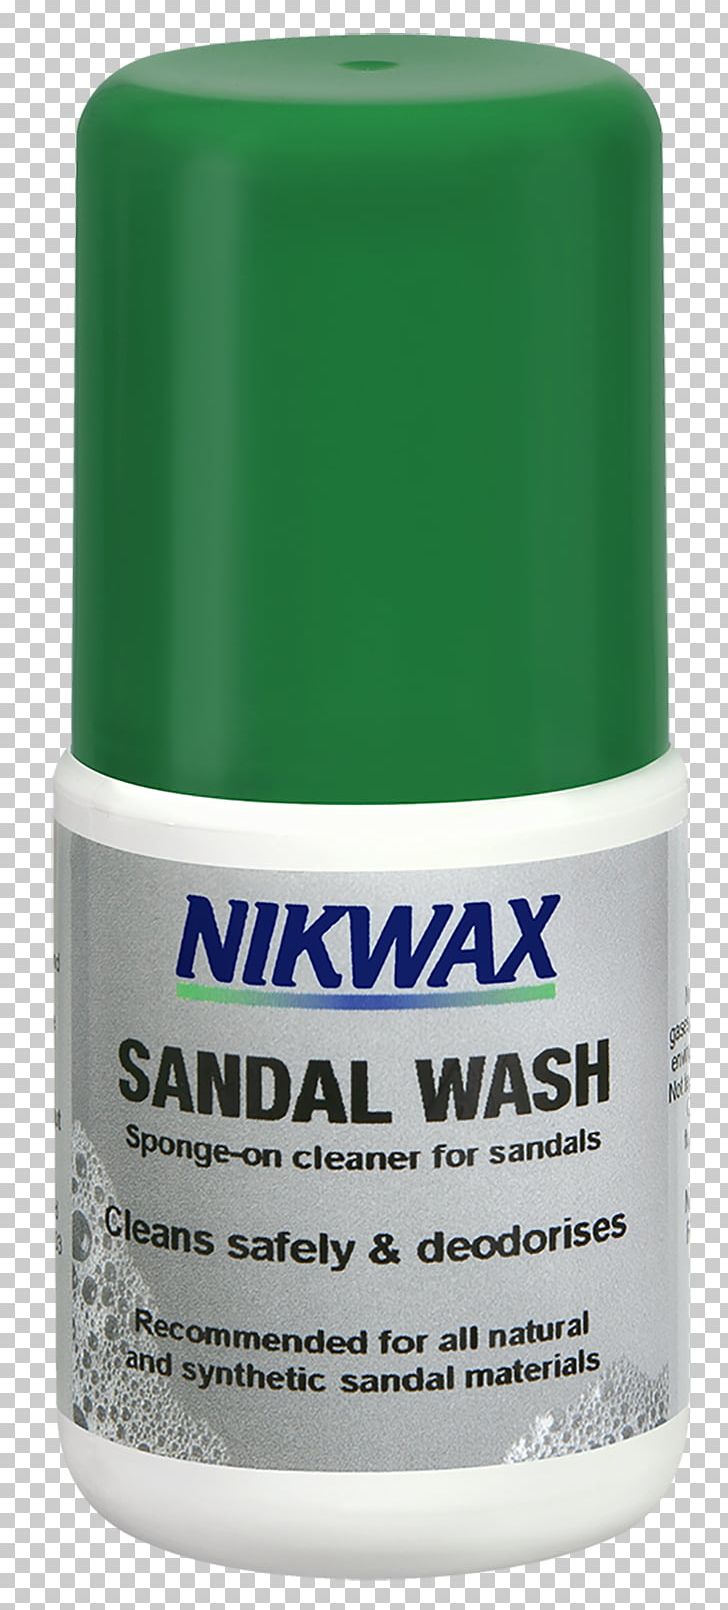 Nikwax Waterproofing Wax For Leather Impermeabilização Cream Product PNG, Clipart, Cream, Laundry, Leather, Milliliter, Waterproofing Free PNG Download